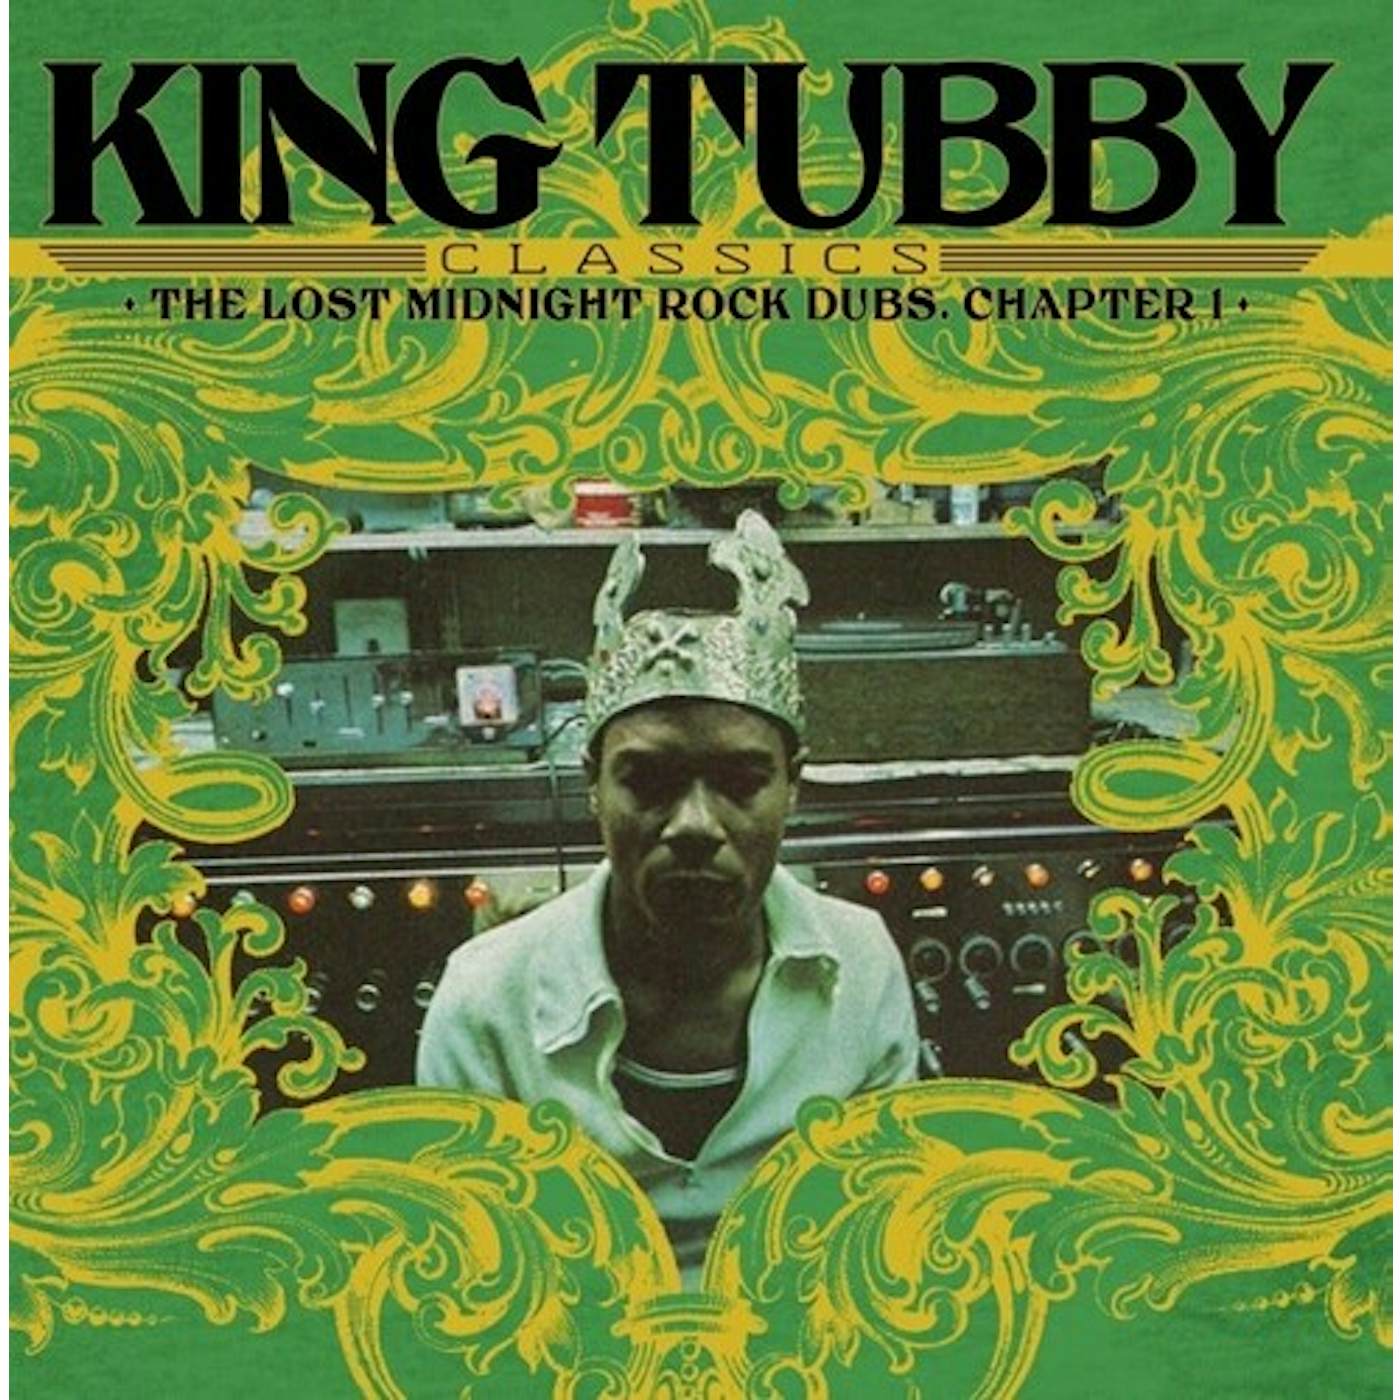 King Tubby Classics: Lost Midnight Rock Dubs Chapter 1 Vinyl Record